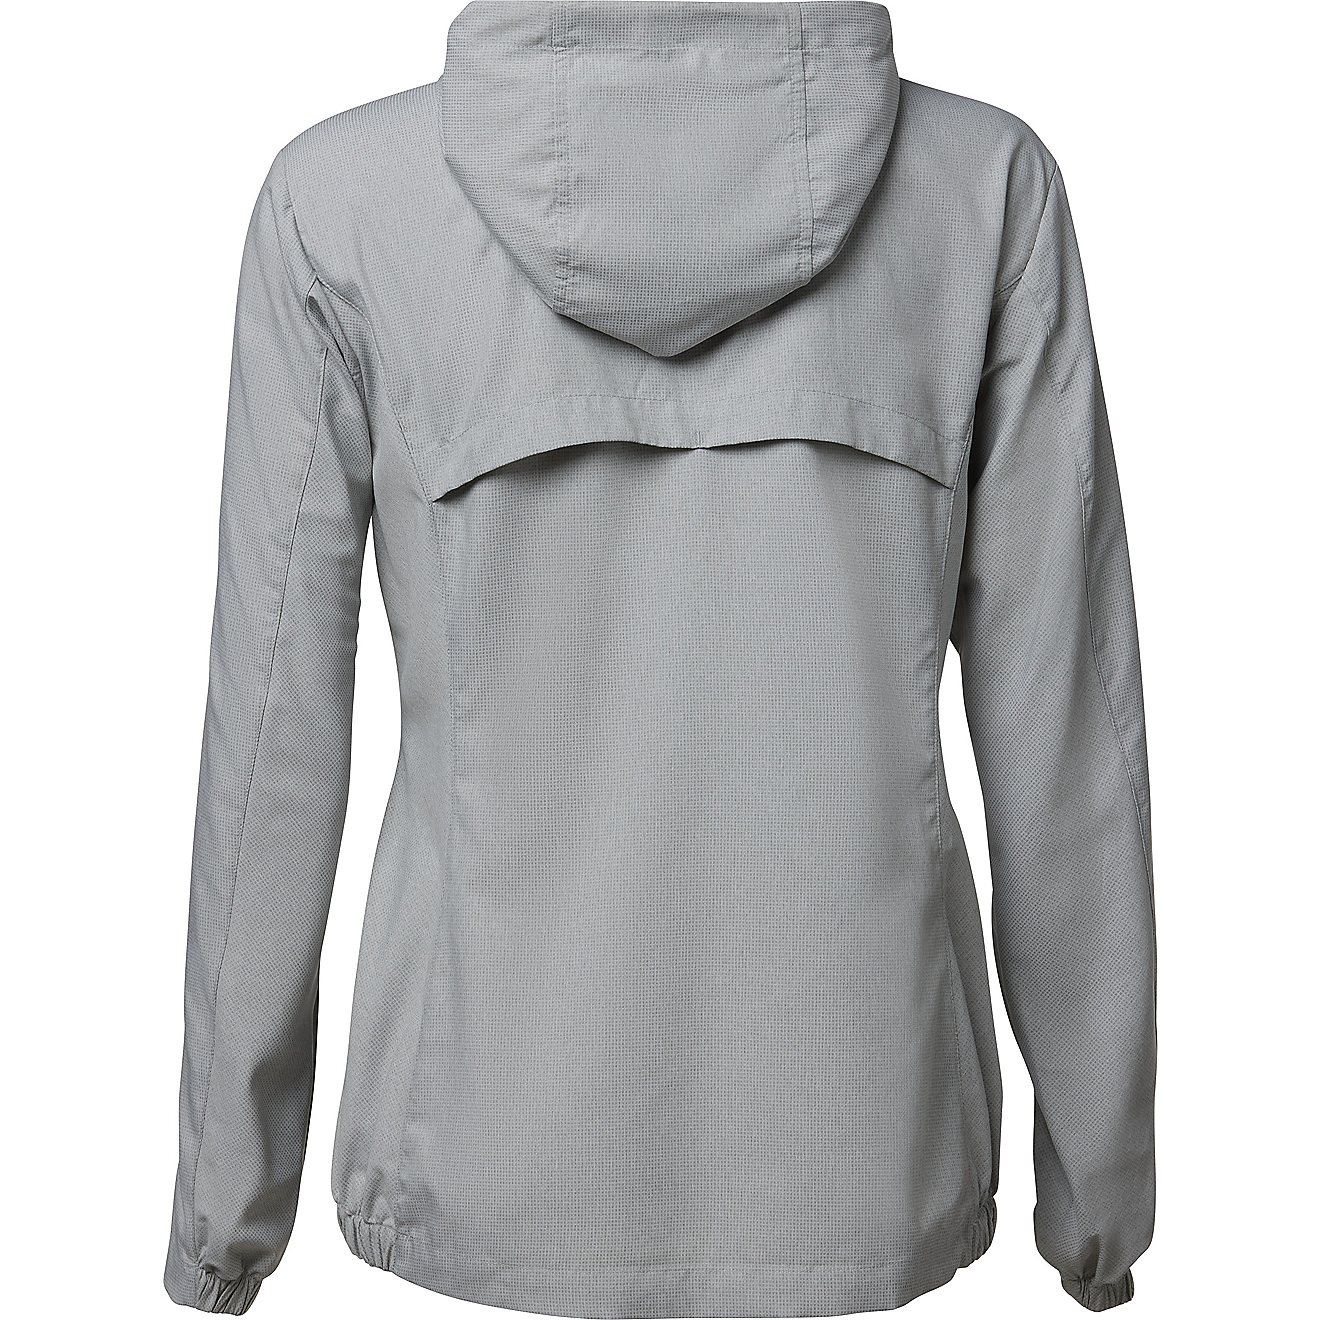 Magellan Outdoors Women's FishGear Overcast Pullover Hoodie                                                                      - view number 2